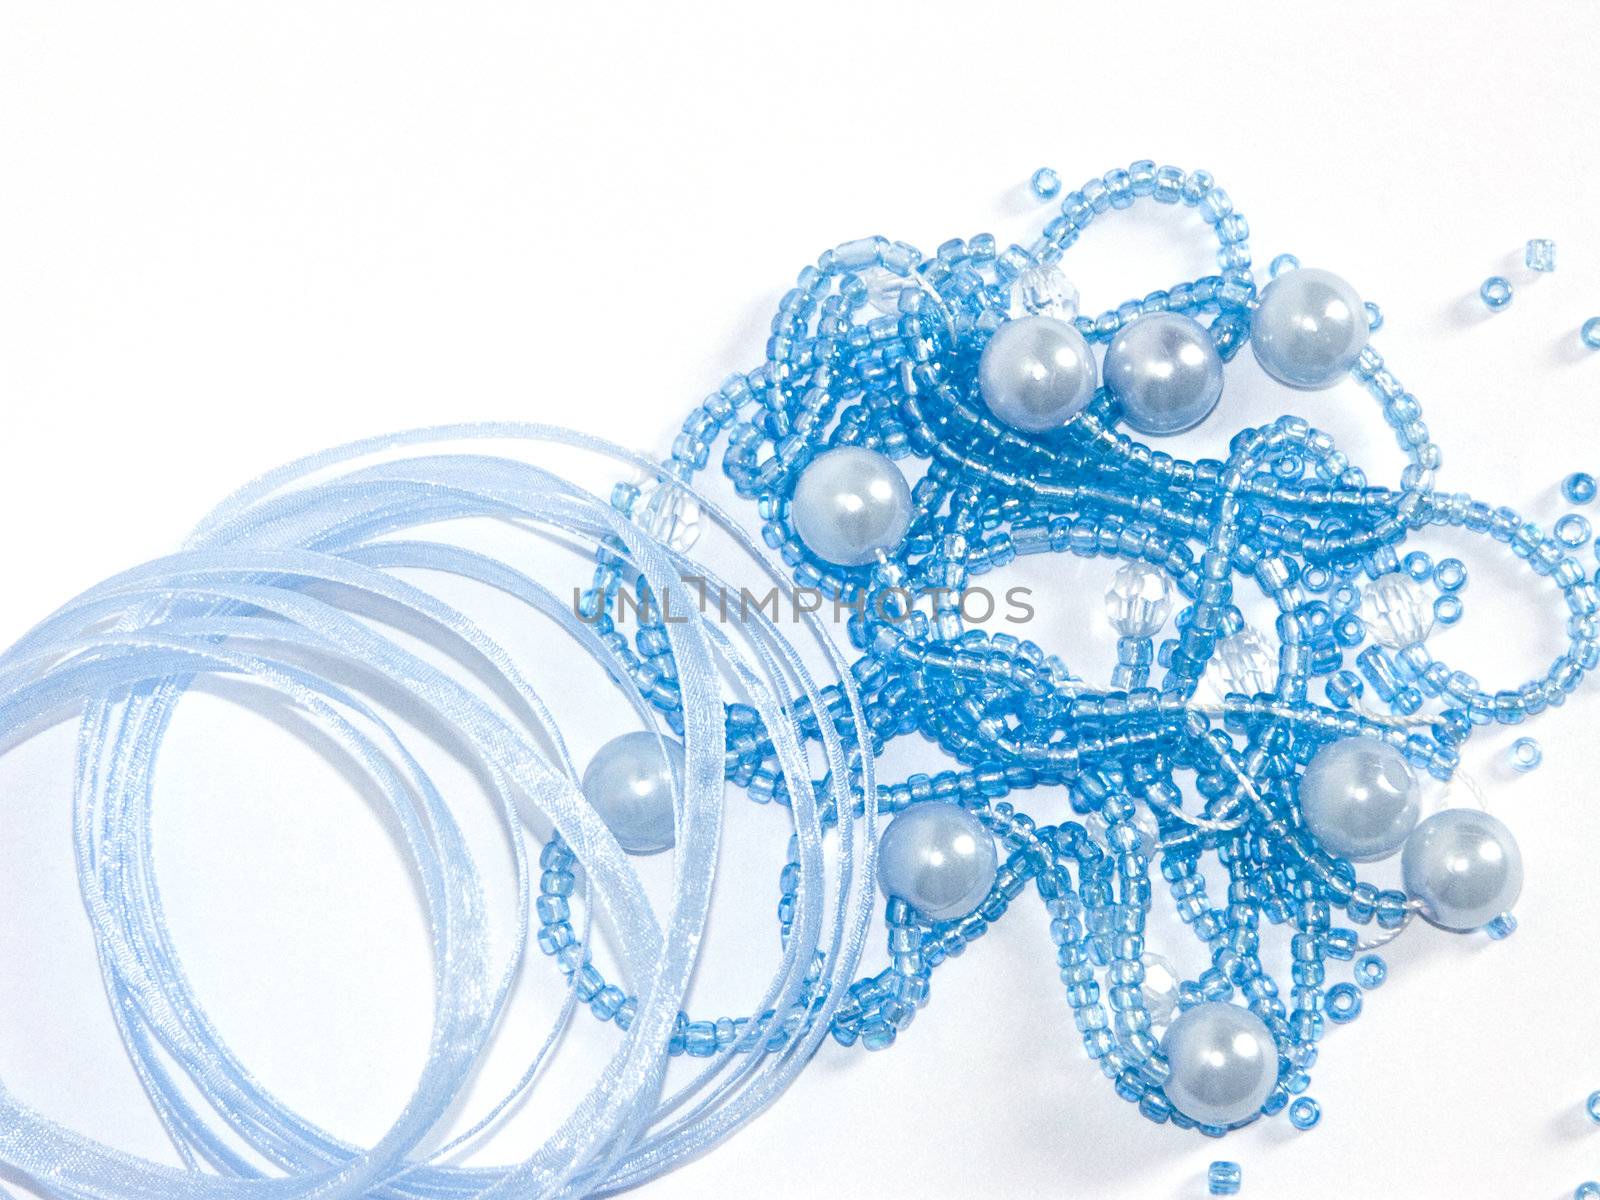 The image of the torn beads and a kapron tape on a white background